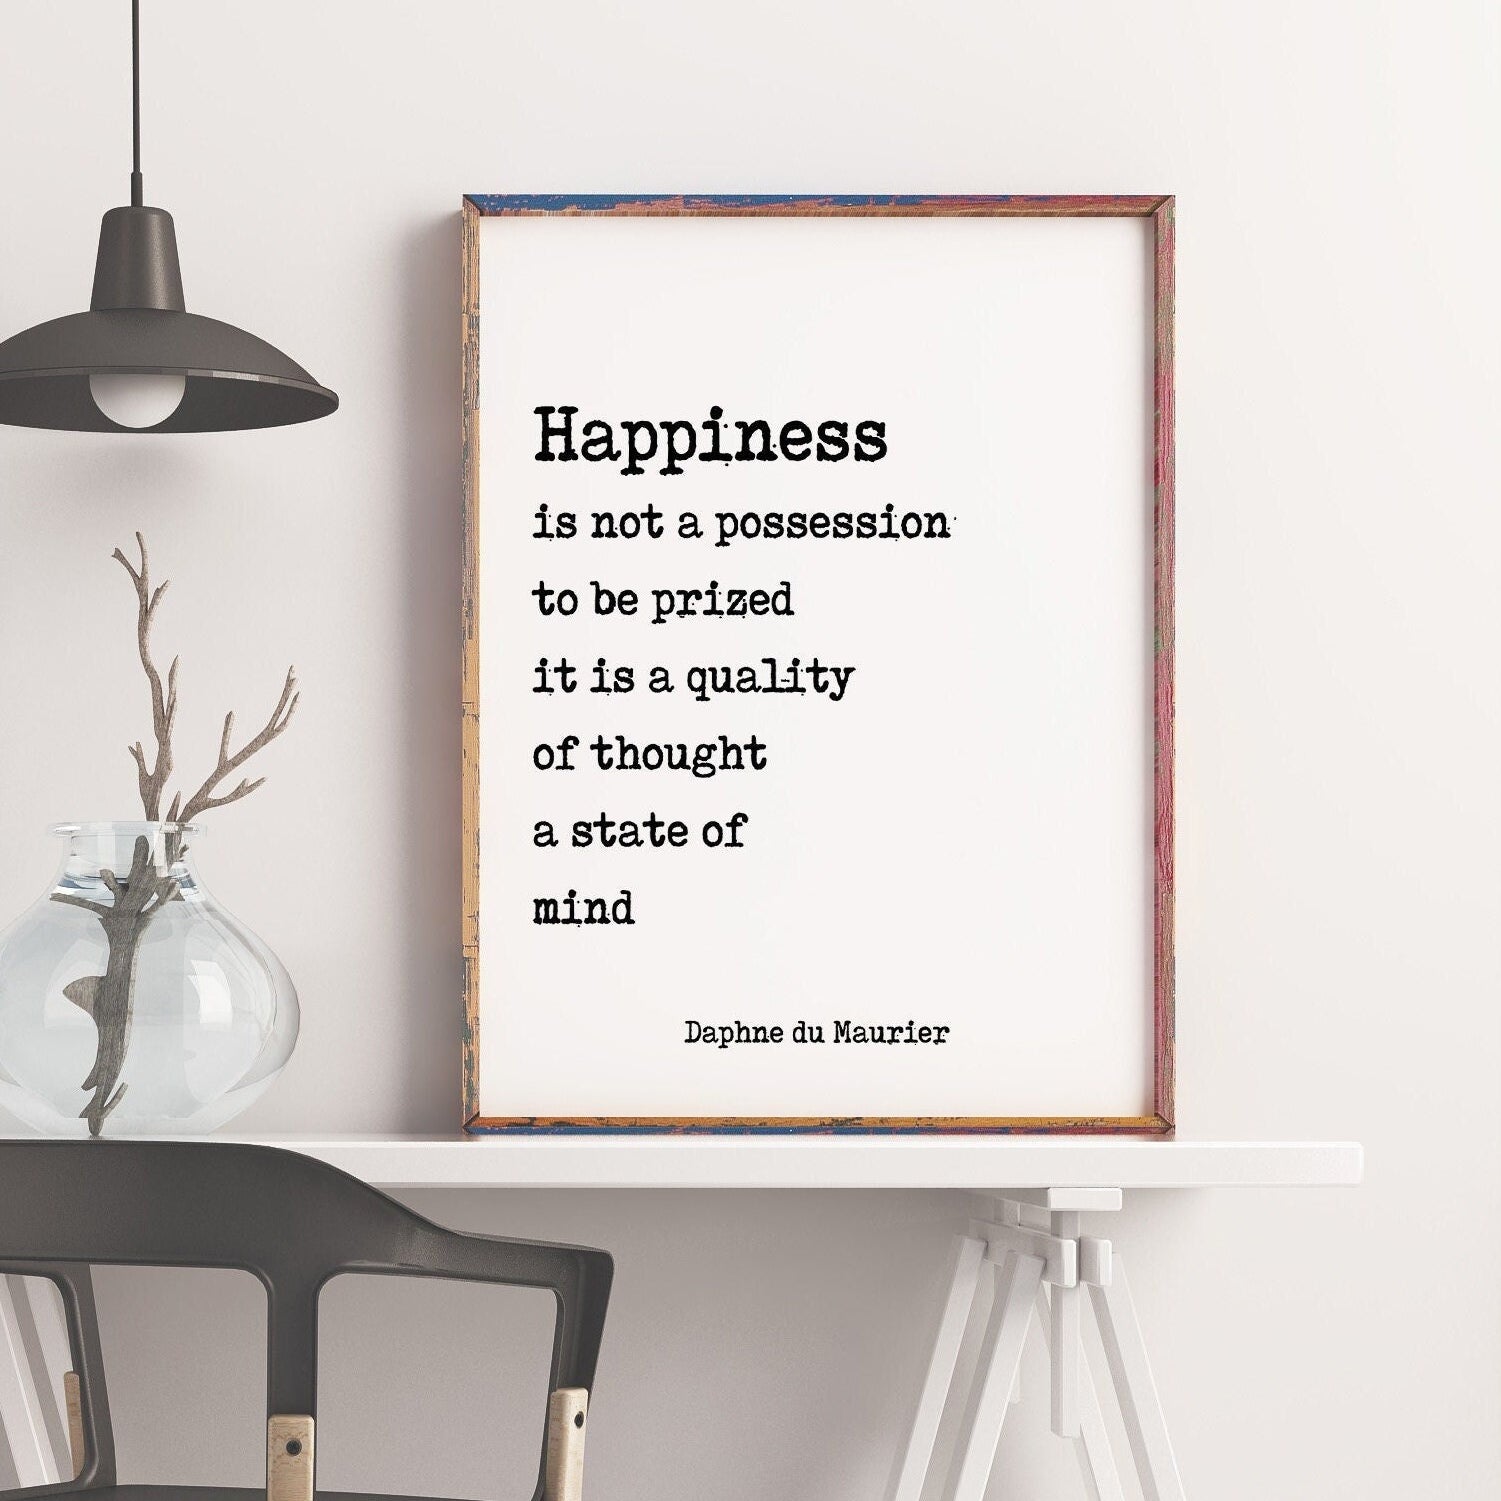 Daphne du Maurier Wall Art Print, Happiness Is Not A Possession To Be Prized Black & White Art Print